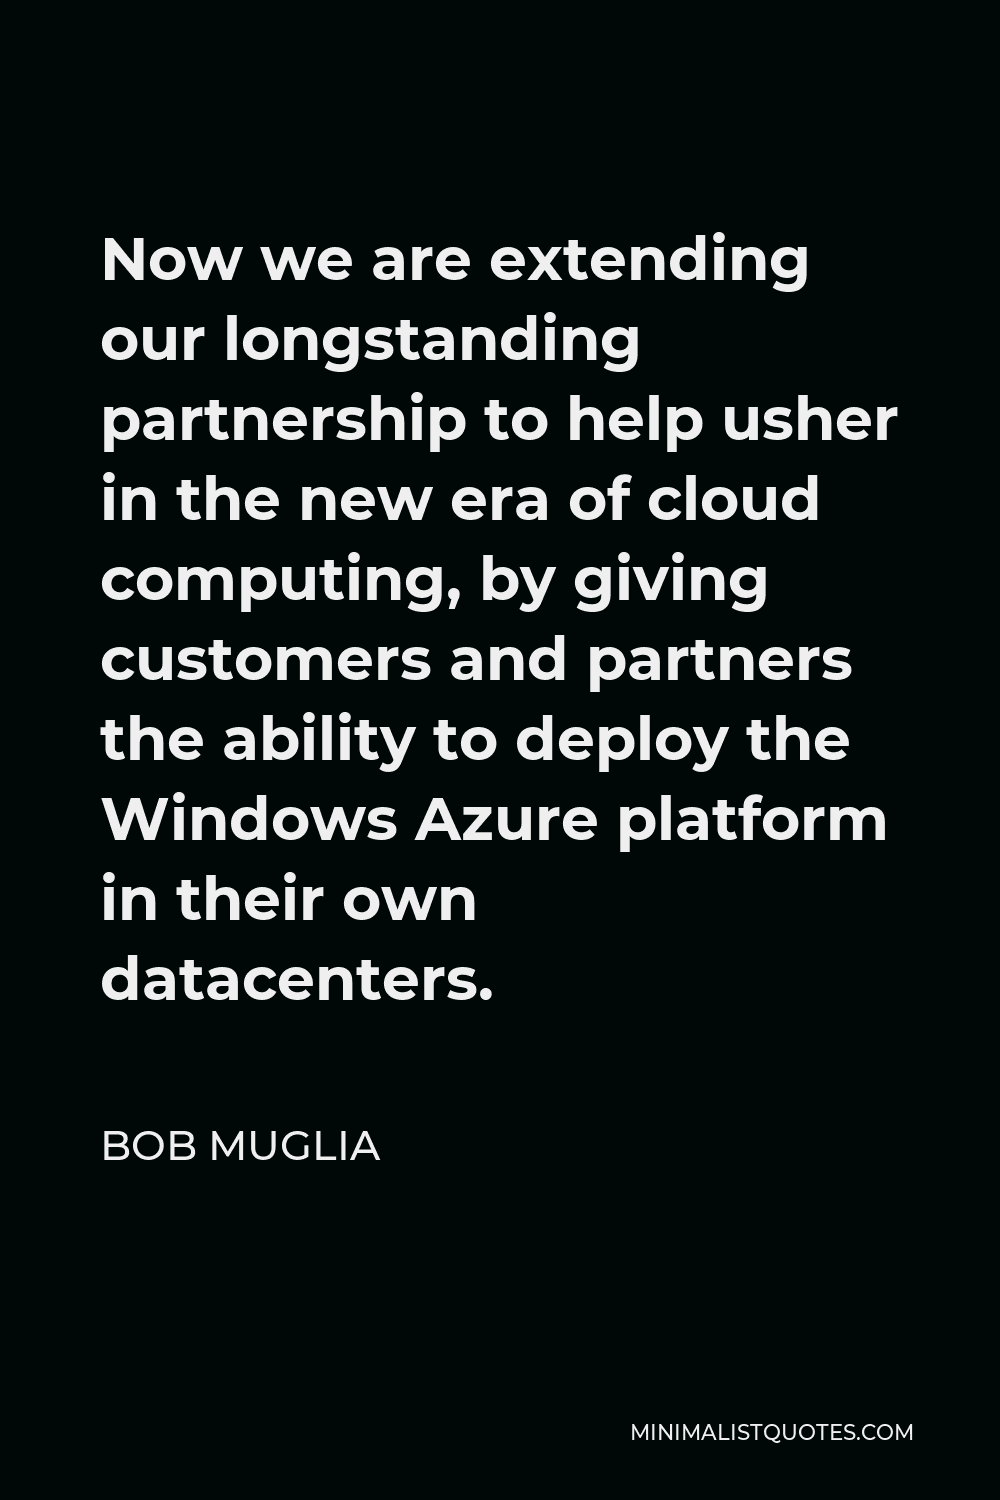 Bob Muglia Quote - Now we are extending our longstanding partnership to help usher in the new era of cloud computing, by giving customers and partners the ability to deploy the Windows Azure platform in their own datacenters.